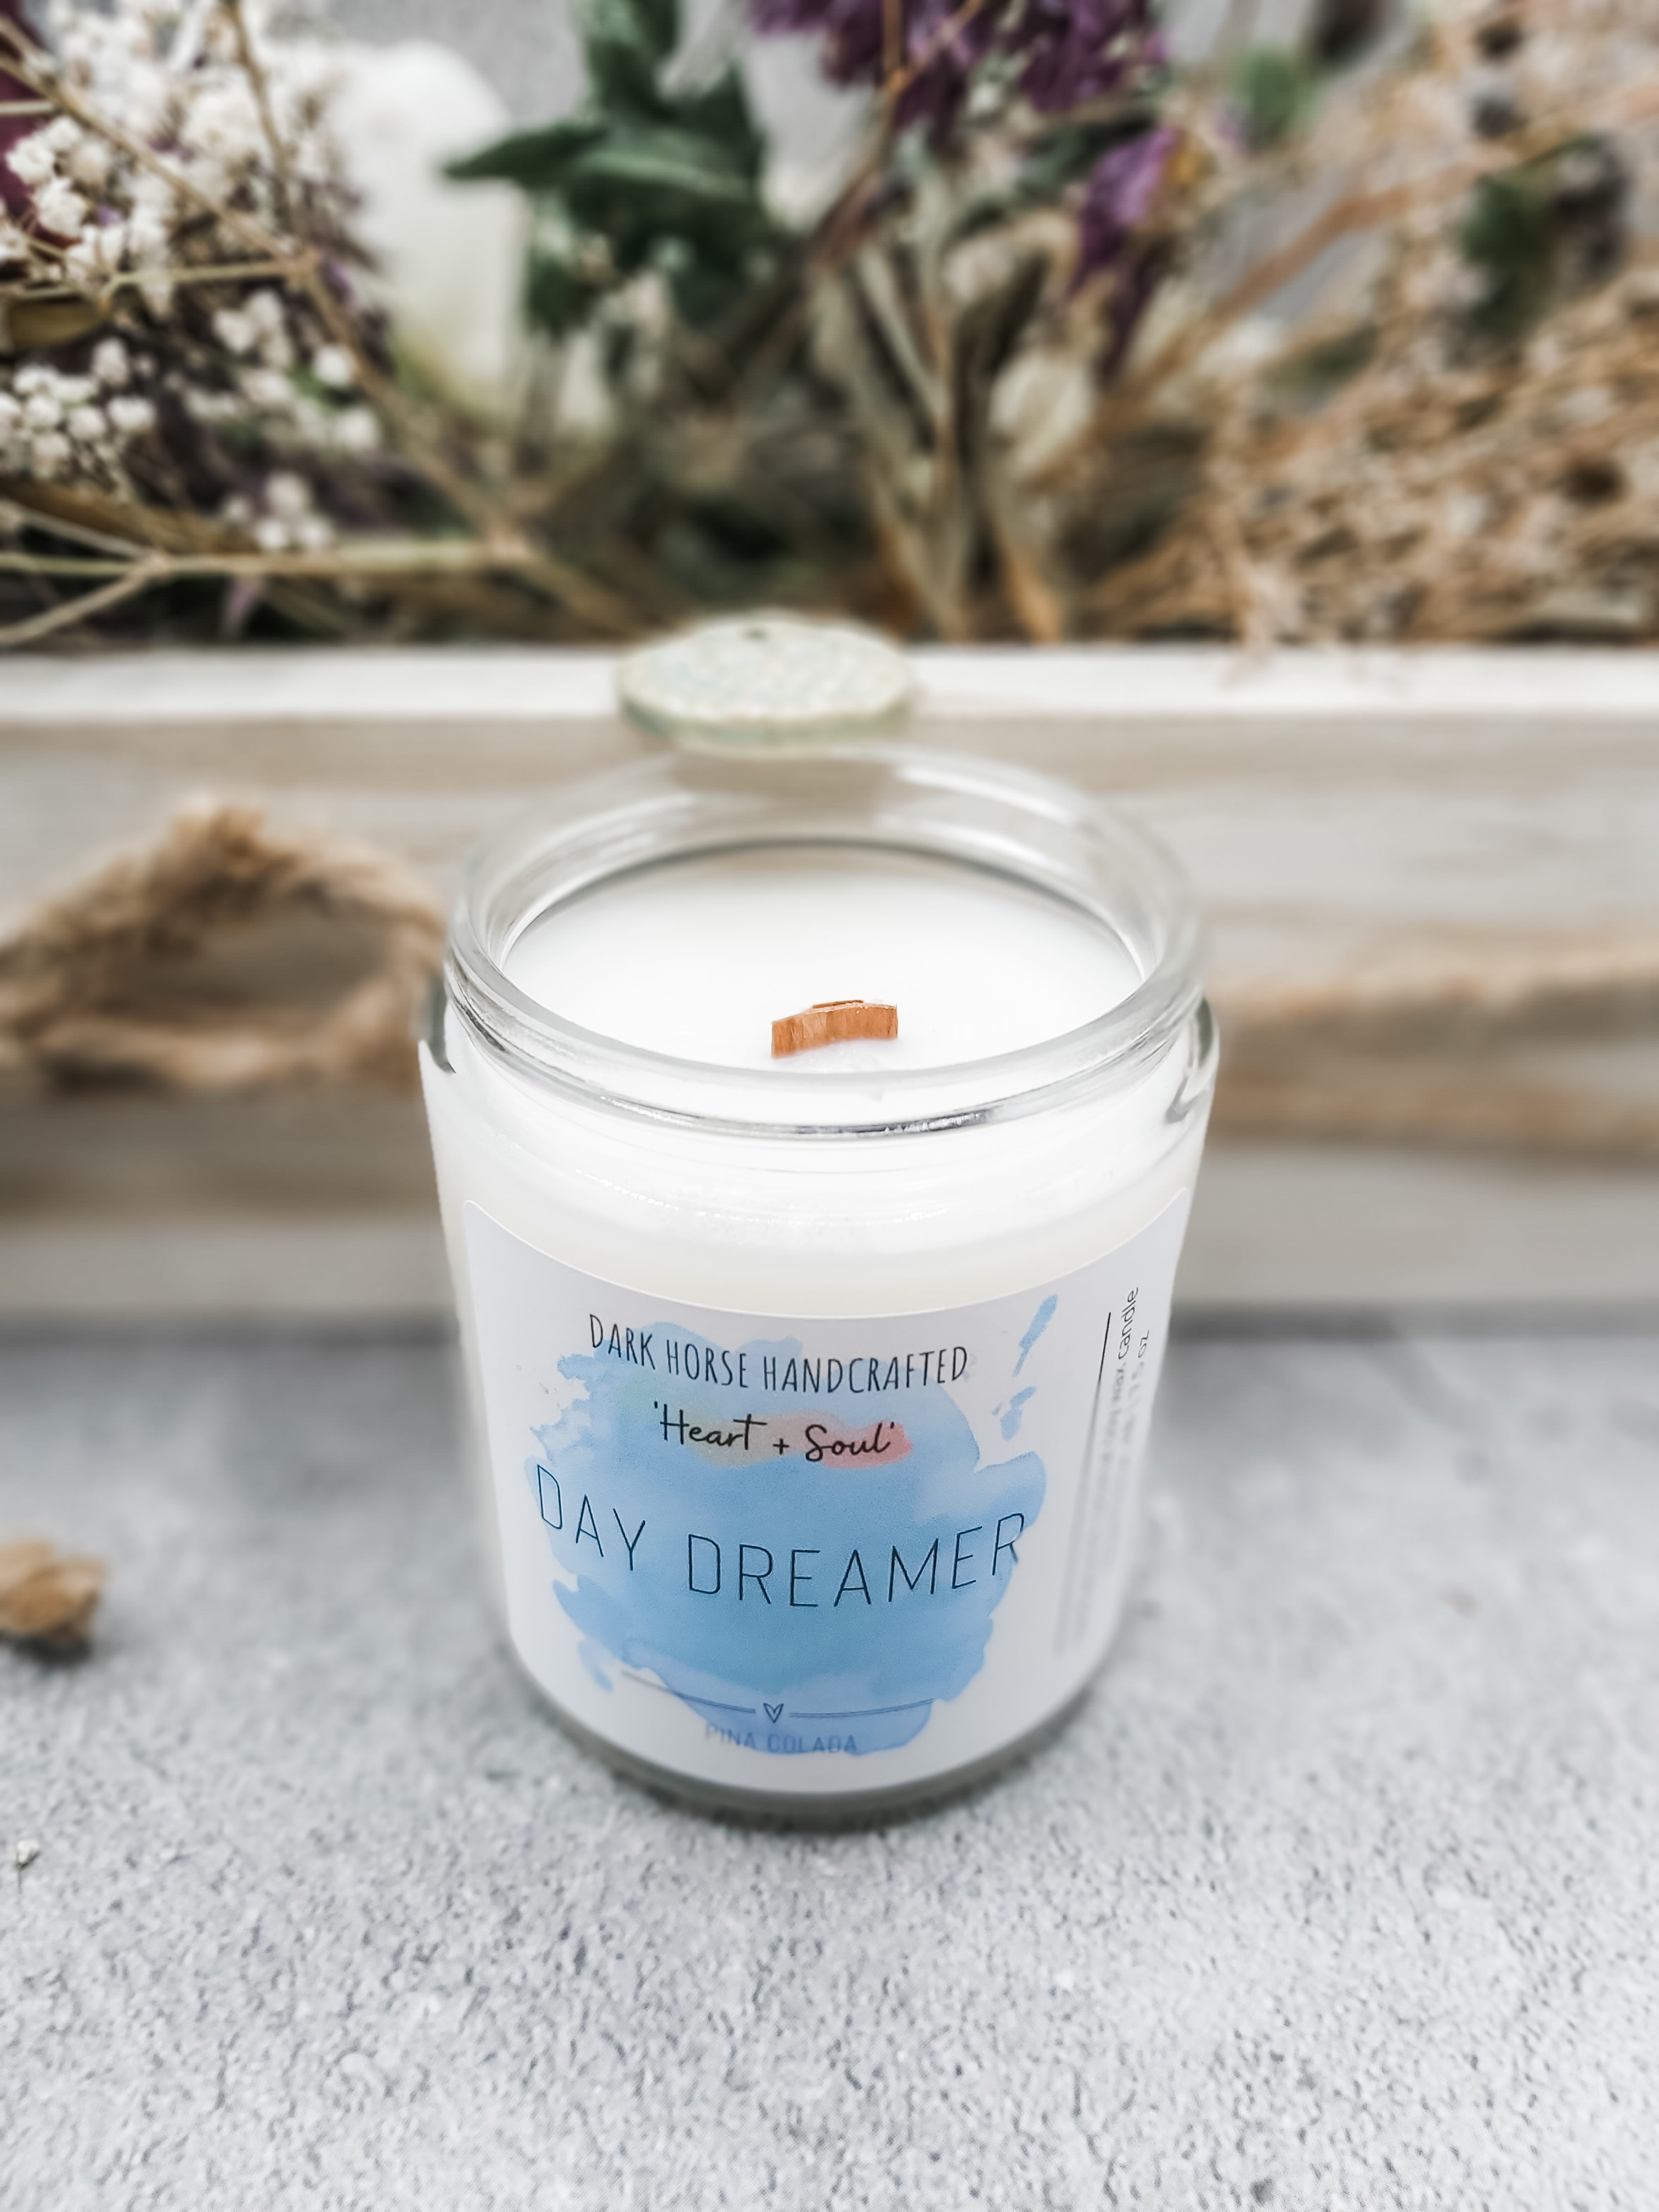 DAY DREAMER - Pina Colada Scented Soy Candle